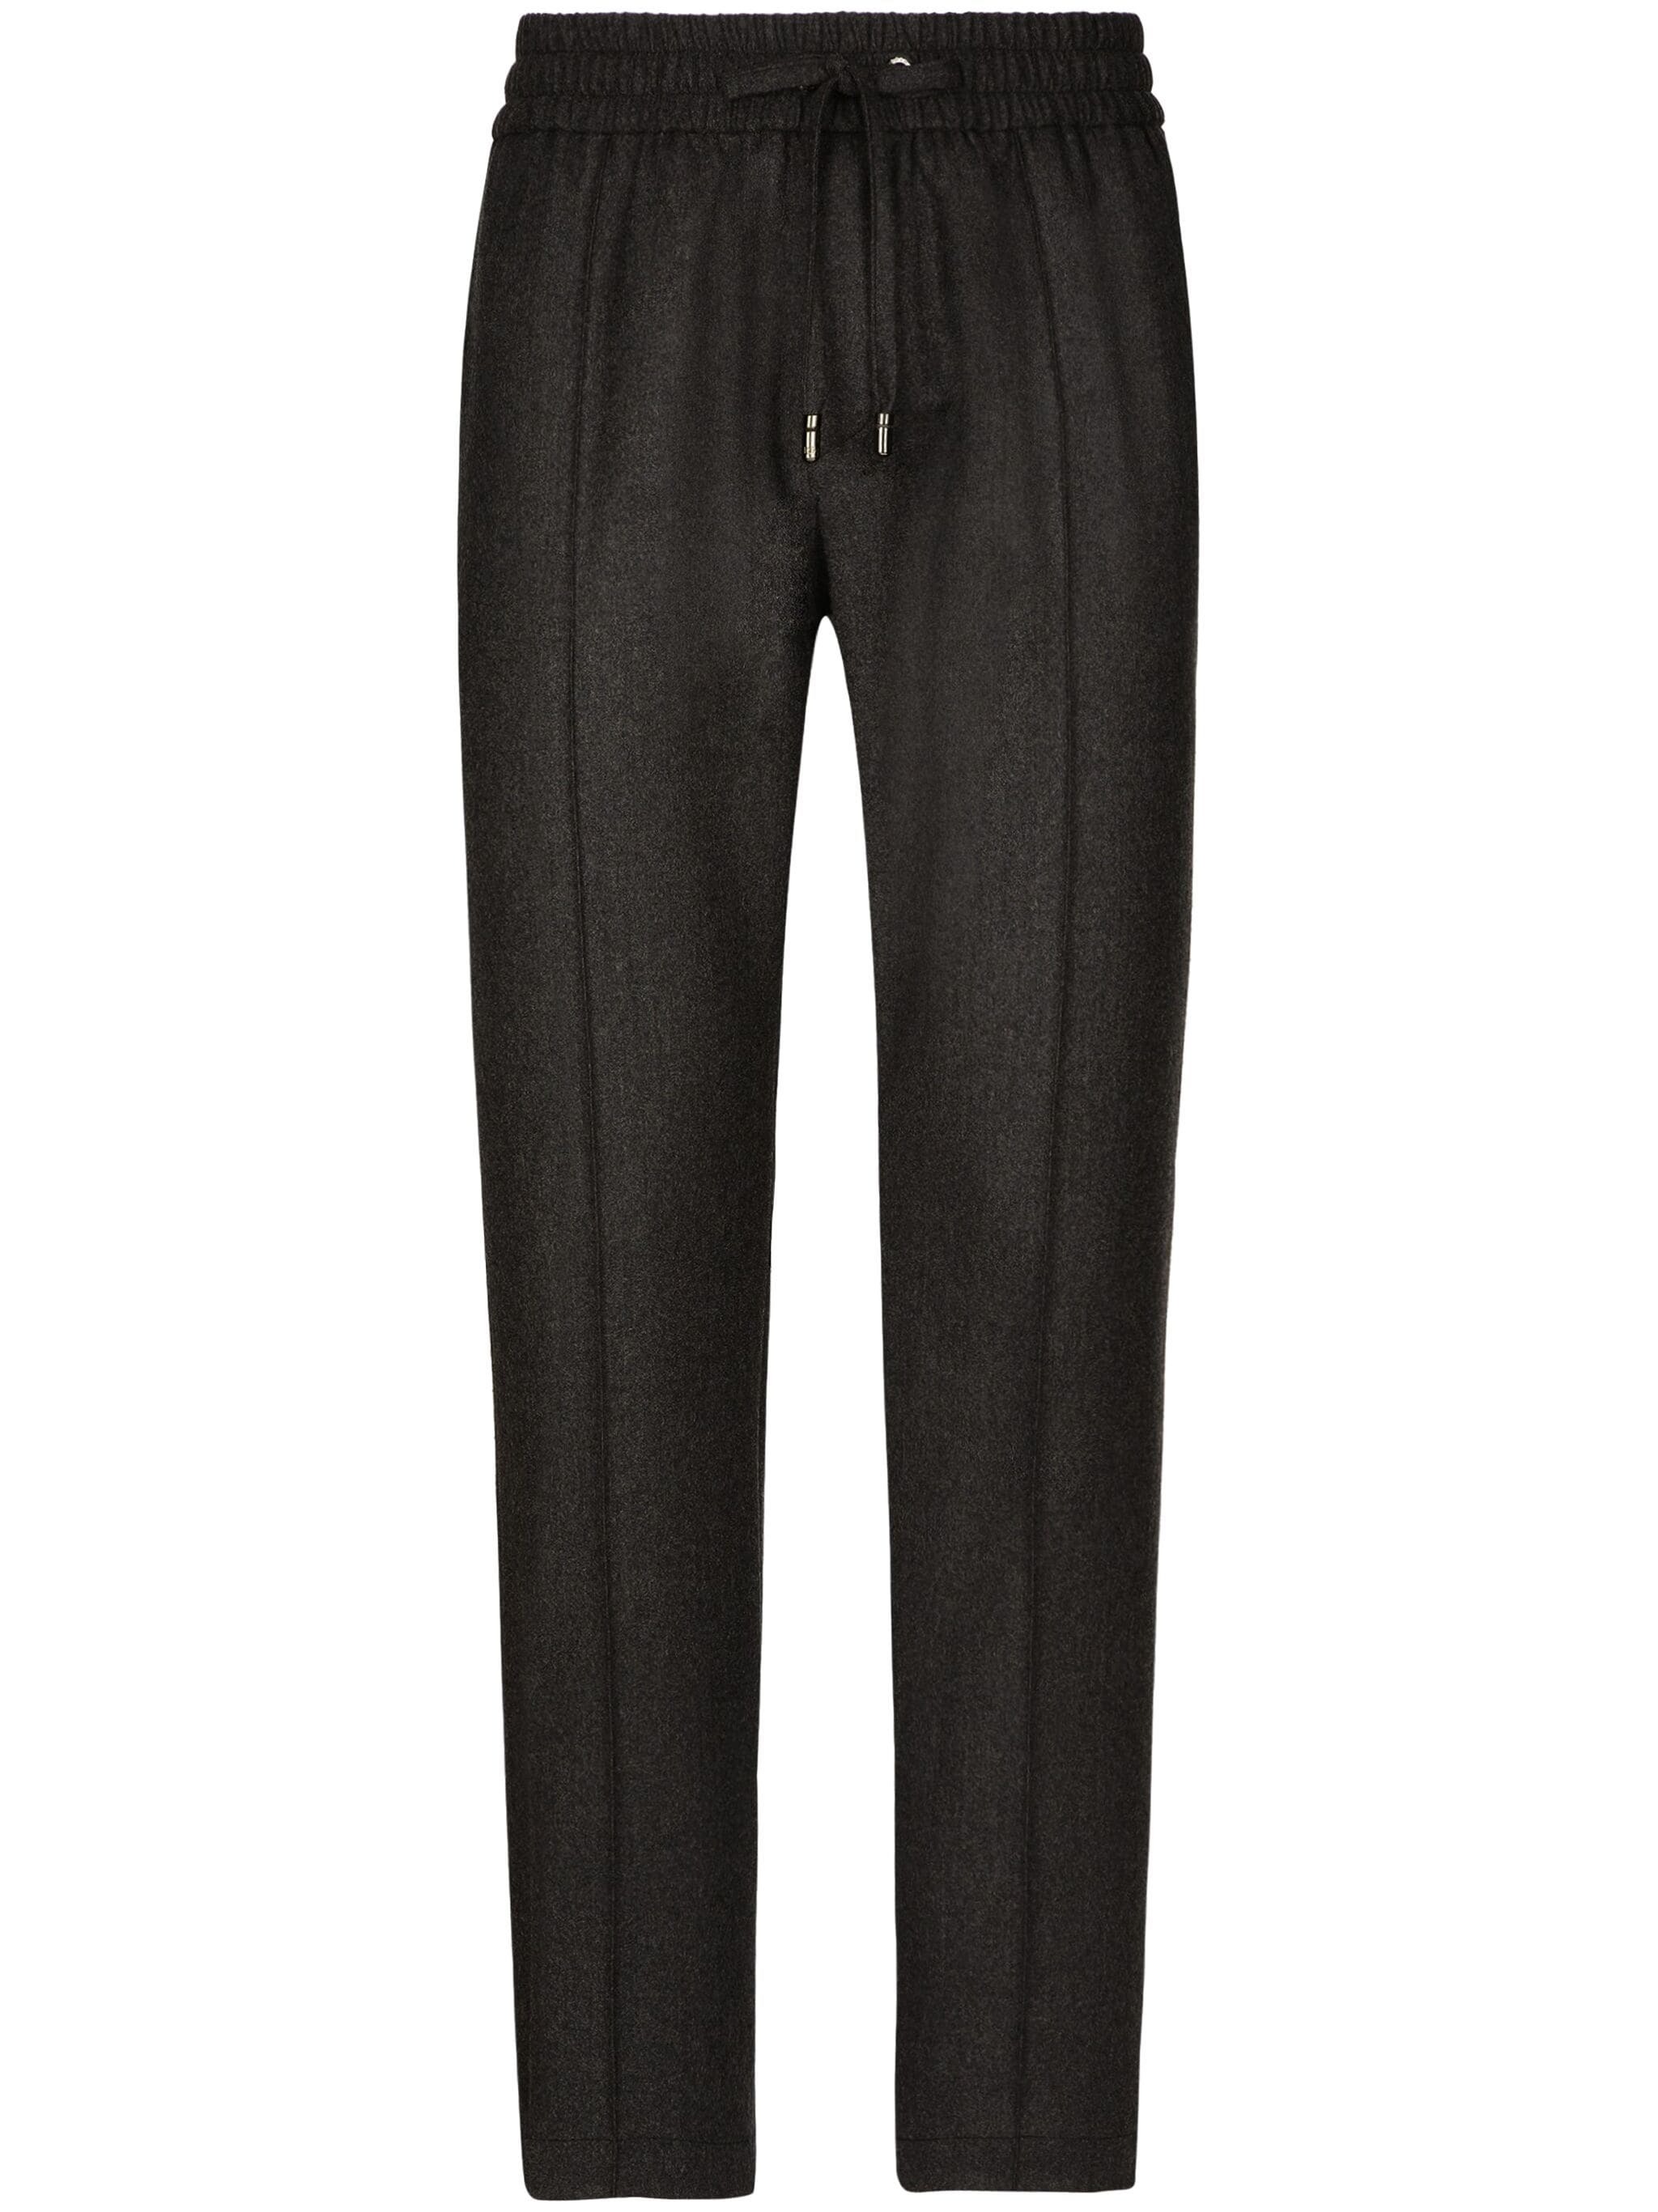 Tailored track pants